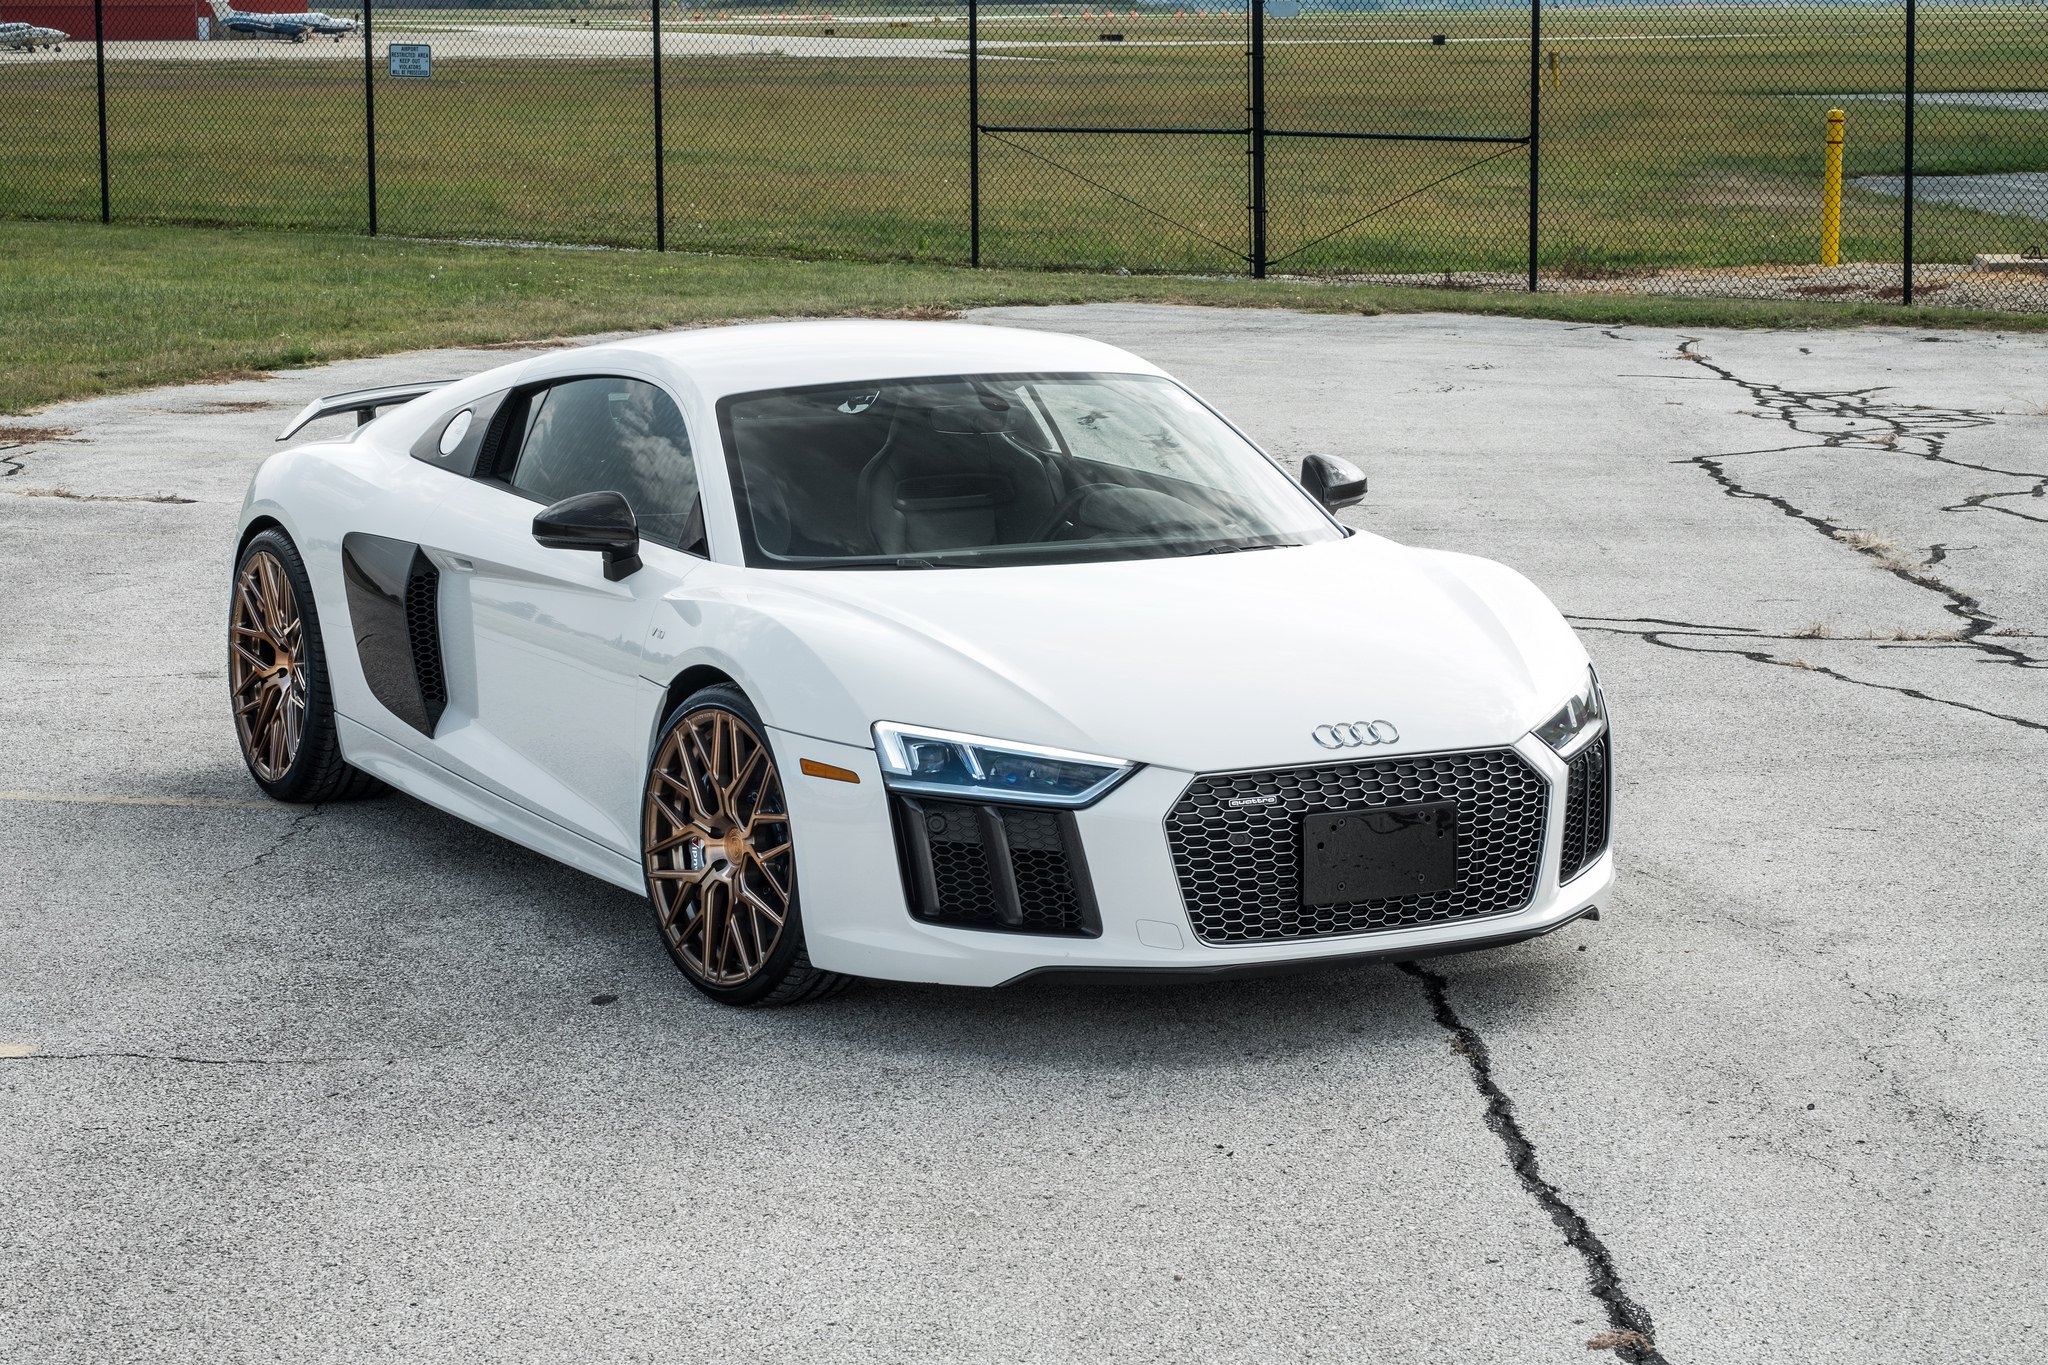 White Audi R8 with Blacked Out Mesh Grille - Photo by zandbox